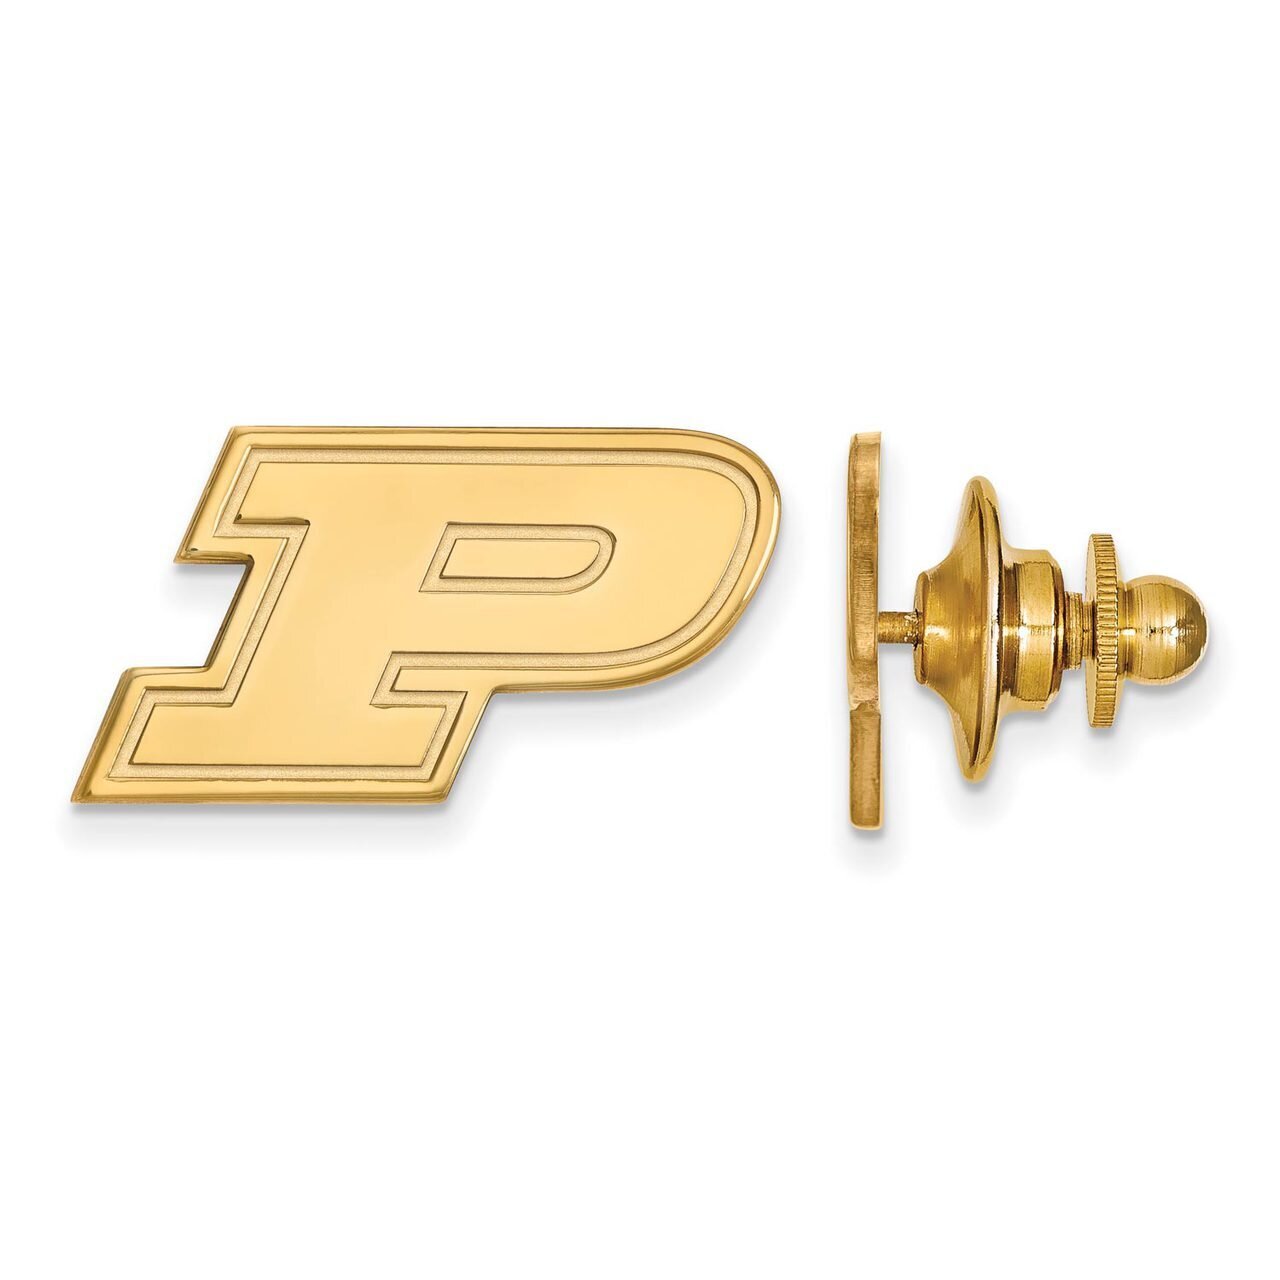 Purdue Lapel Pin Gold-plated Silver GP011PU